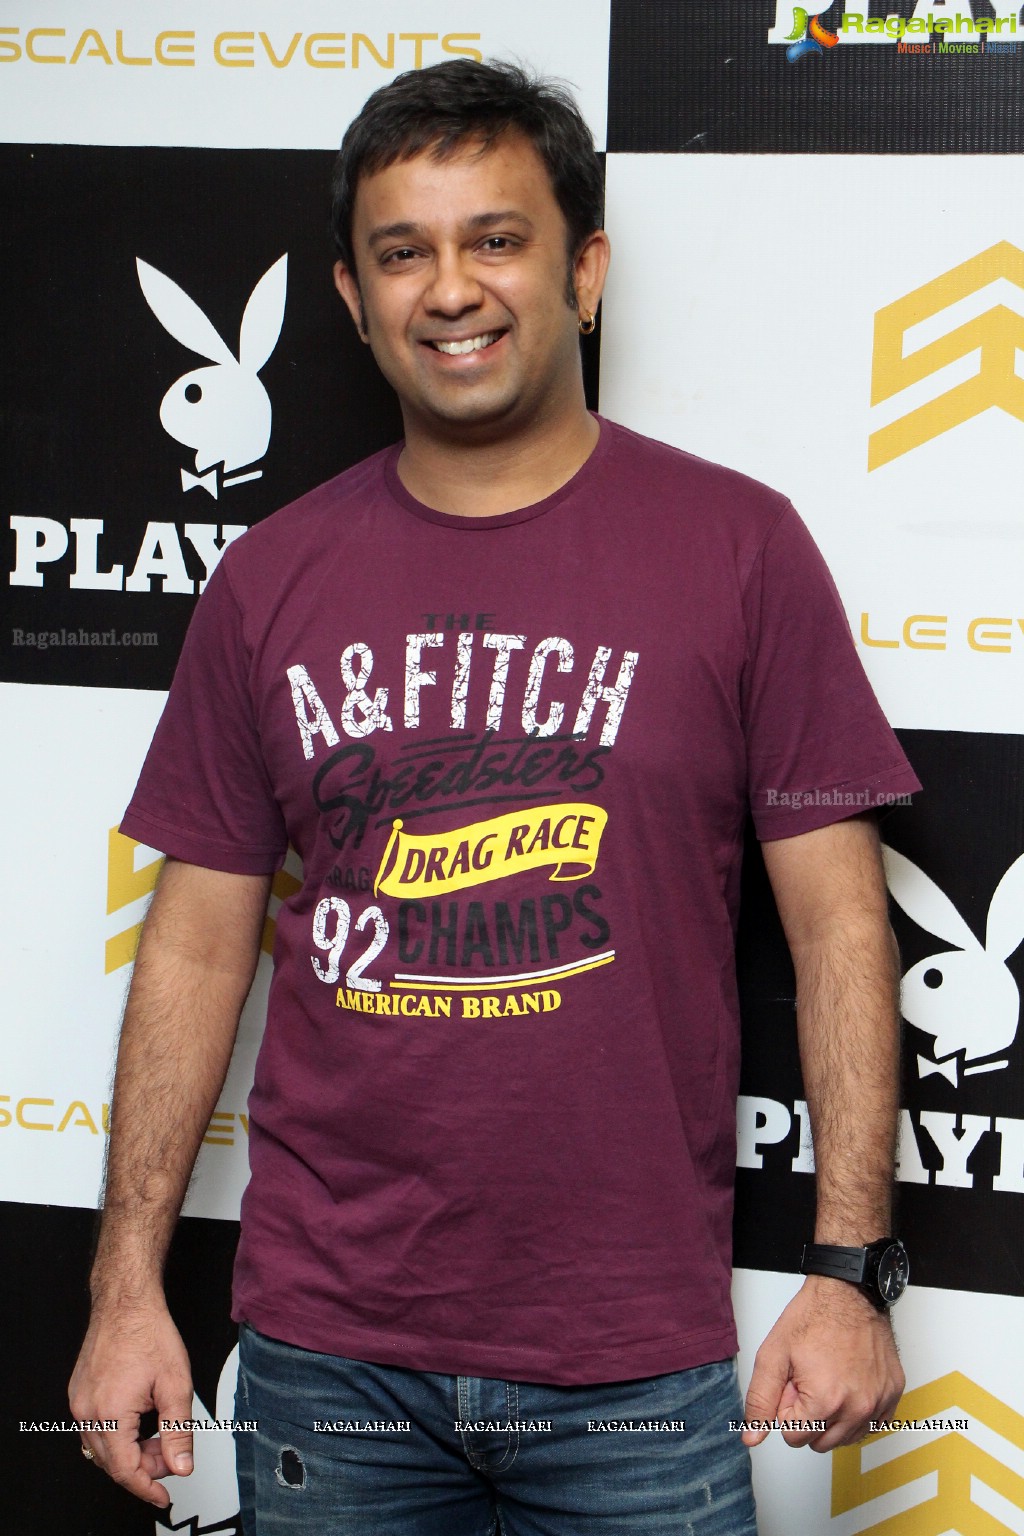 Party with DJ Piyush Bajaj at Playboy Club, Hyderabad - Event by Scale Events